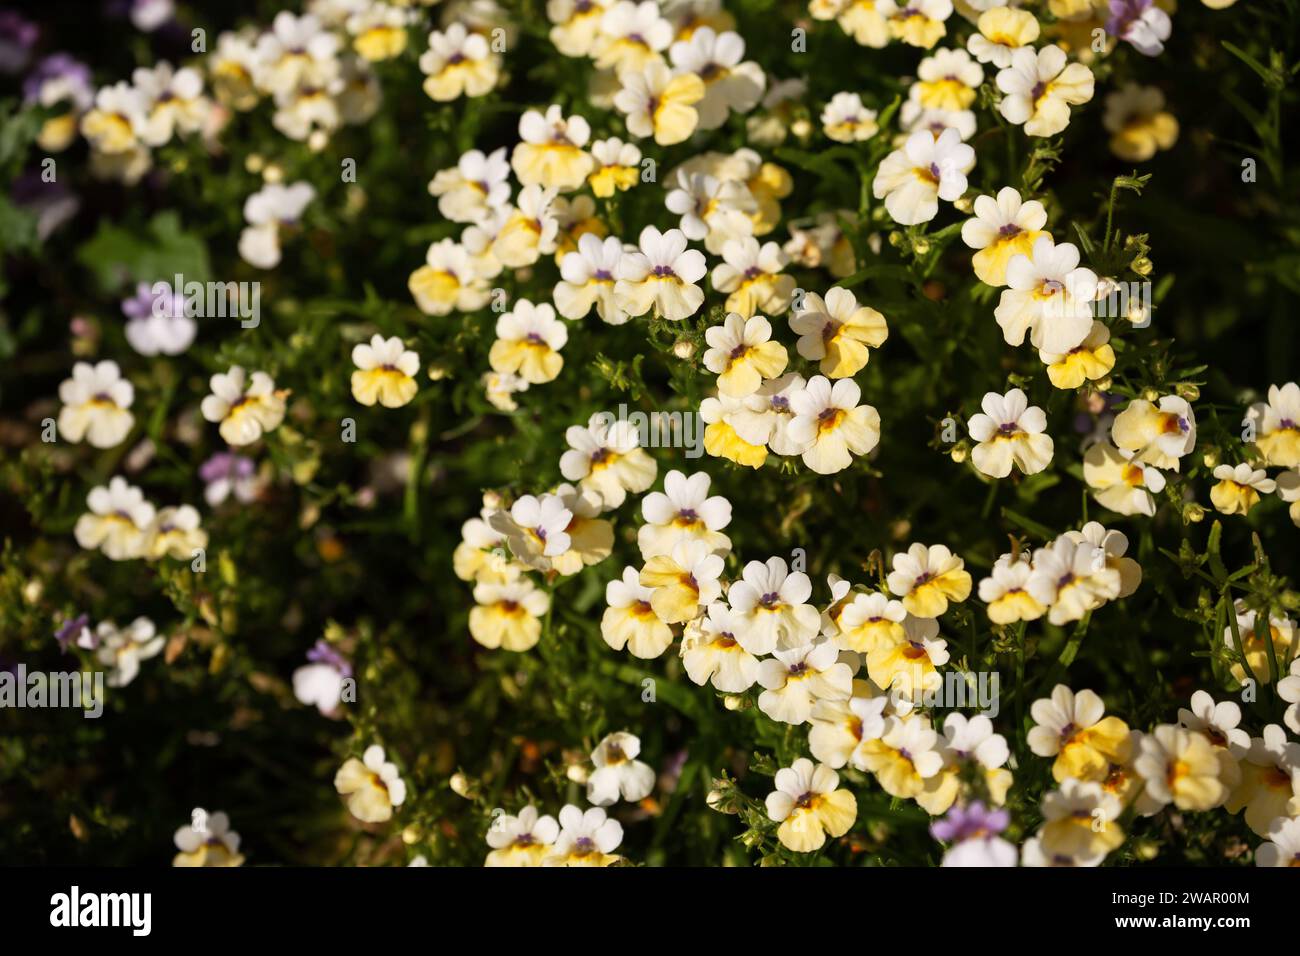 Ornamental plant Nemesia with yellow flowers on a flower bed in the garden Stock Photo